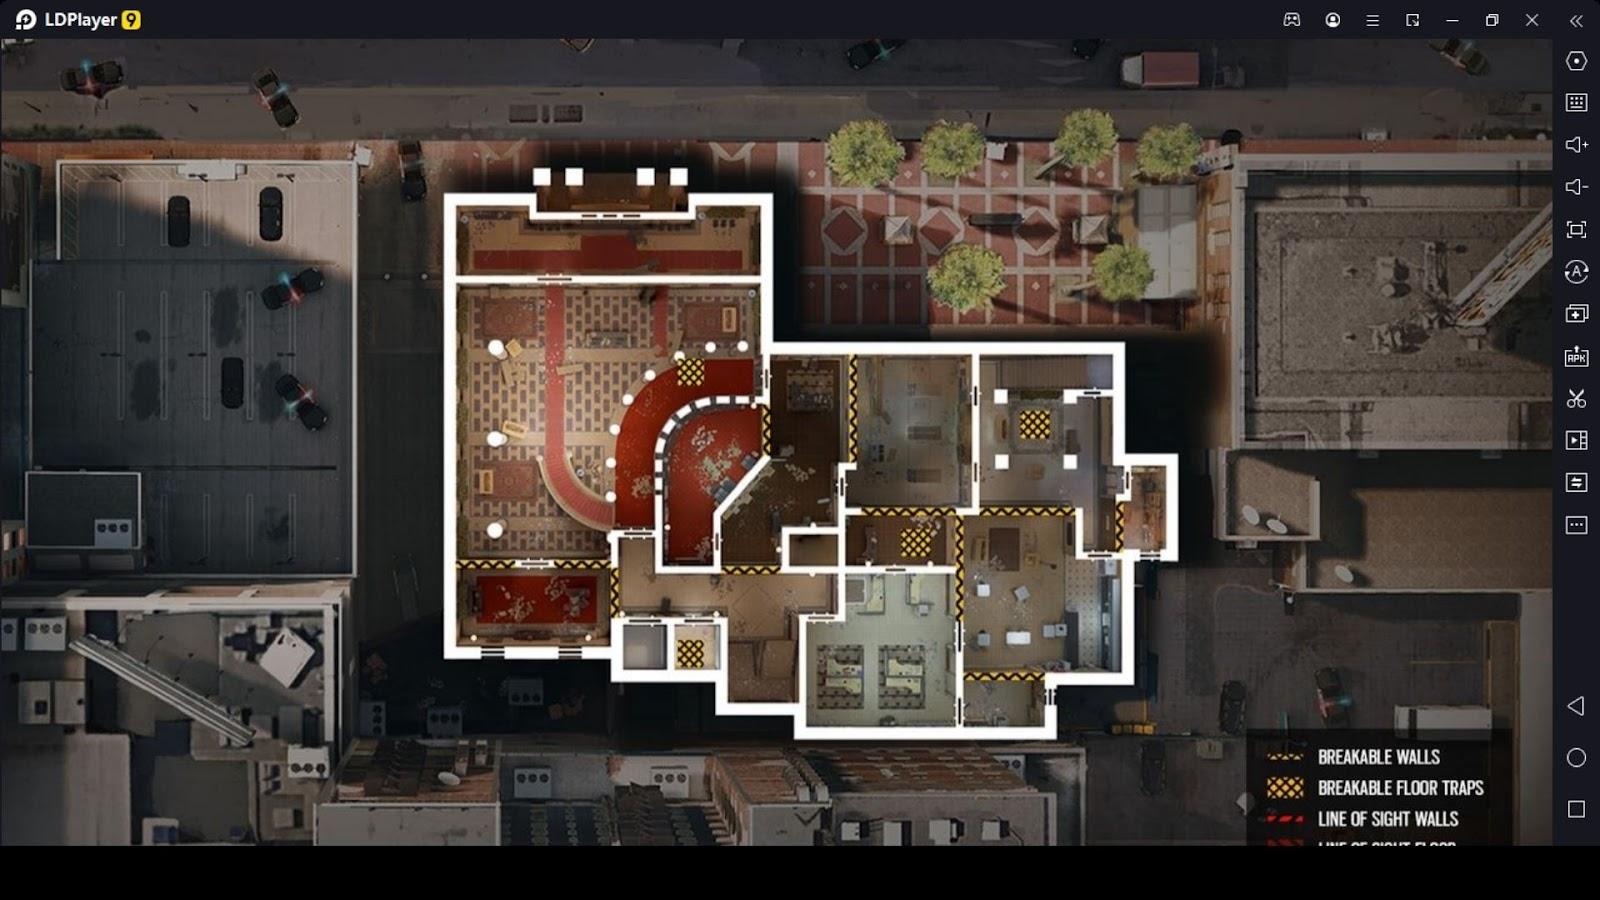 Rainbow Six Mobile Maps - Guide for all the Confirmed Maps-Game  Guides-LDPlayer